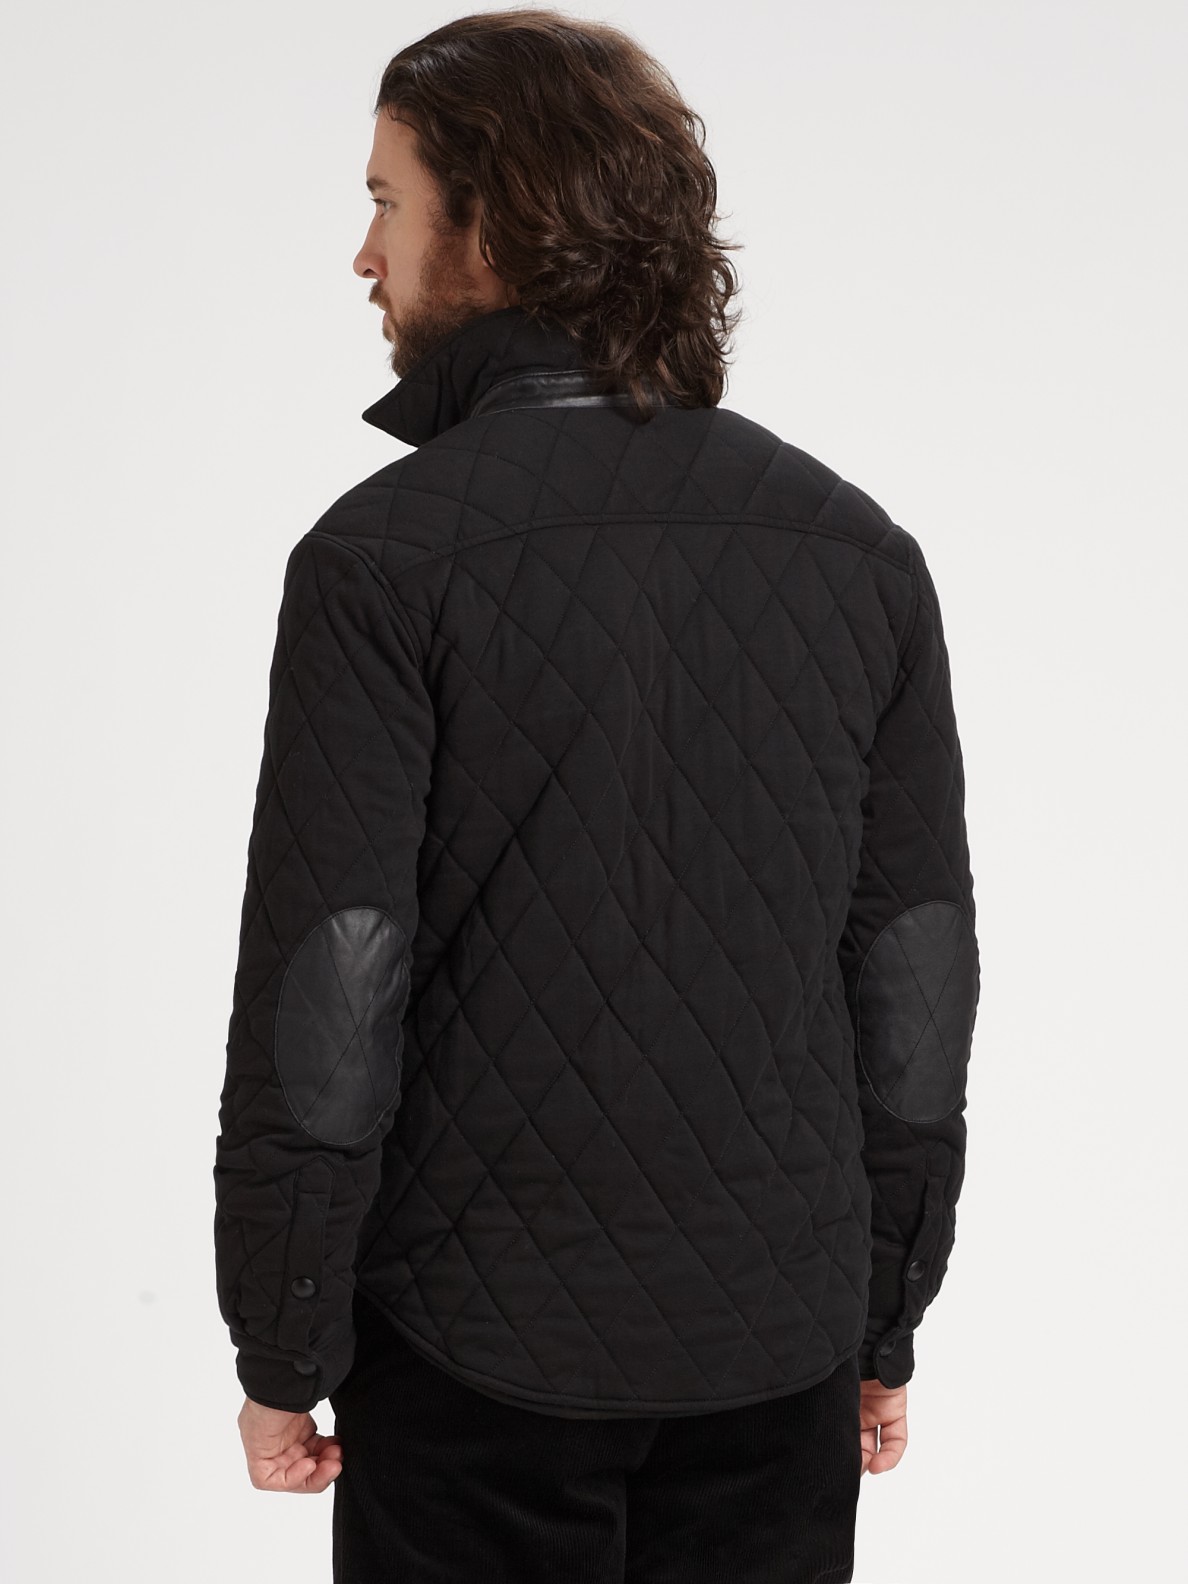 Lyst - Polo Ralph Lauren Quilted Shirt Jacket in Black for Men